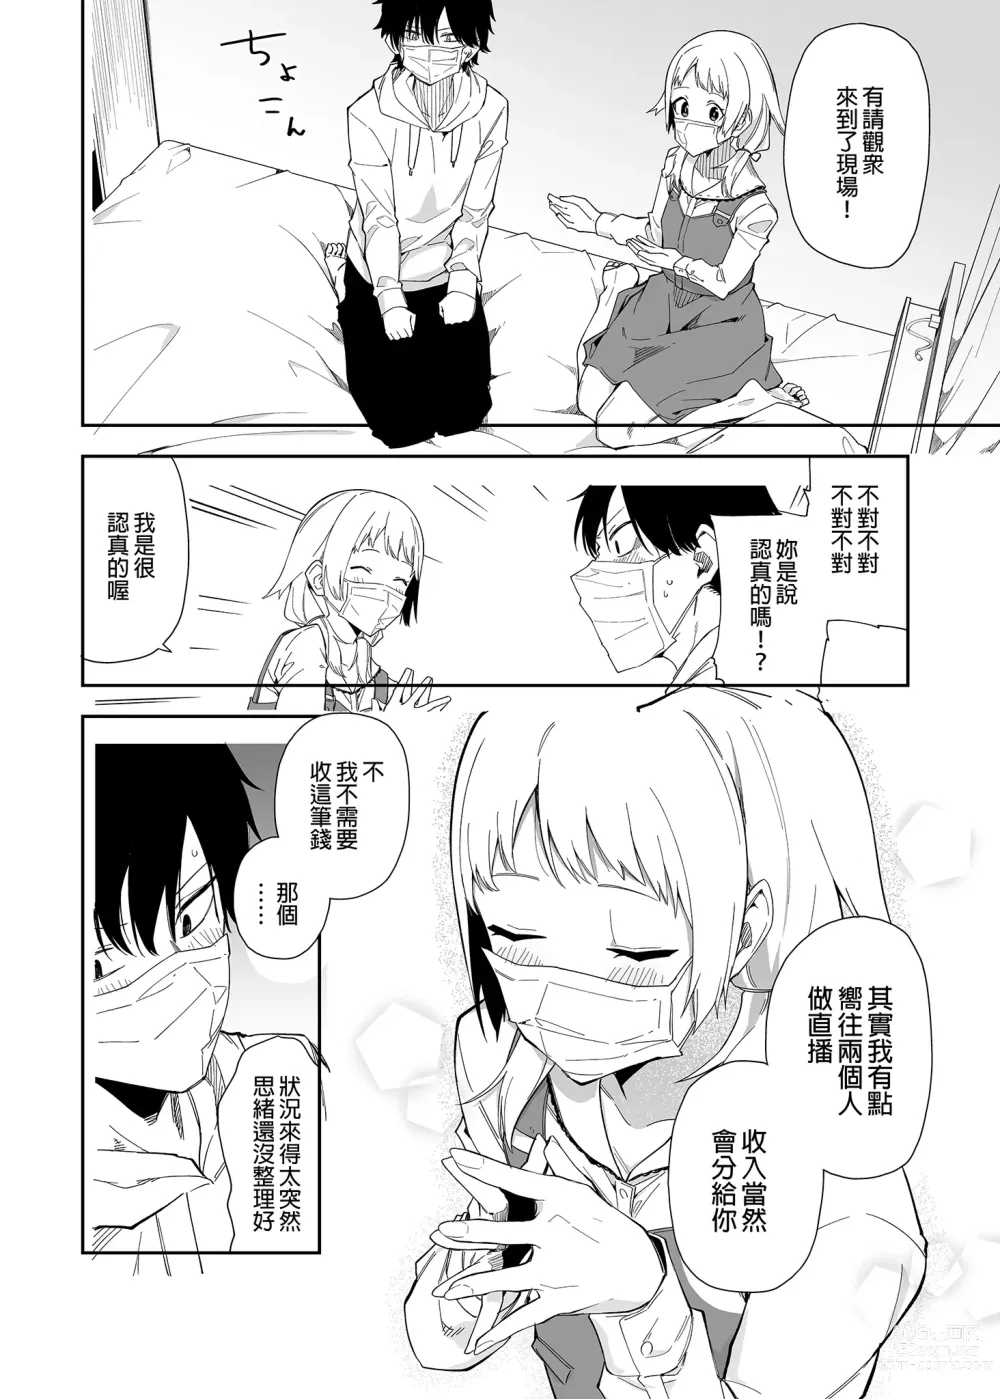 Page 14 of doujinshi 隣人は有名配信者